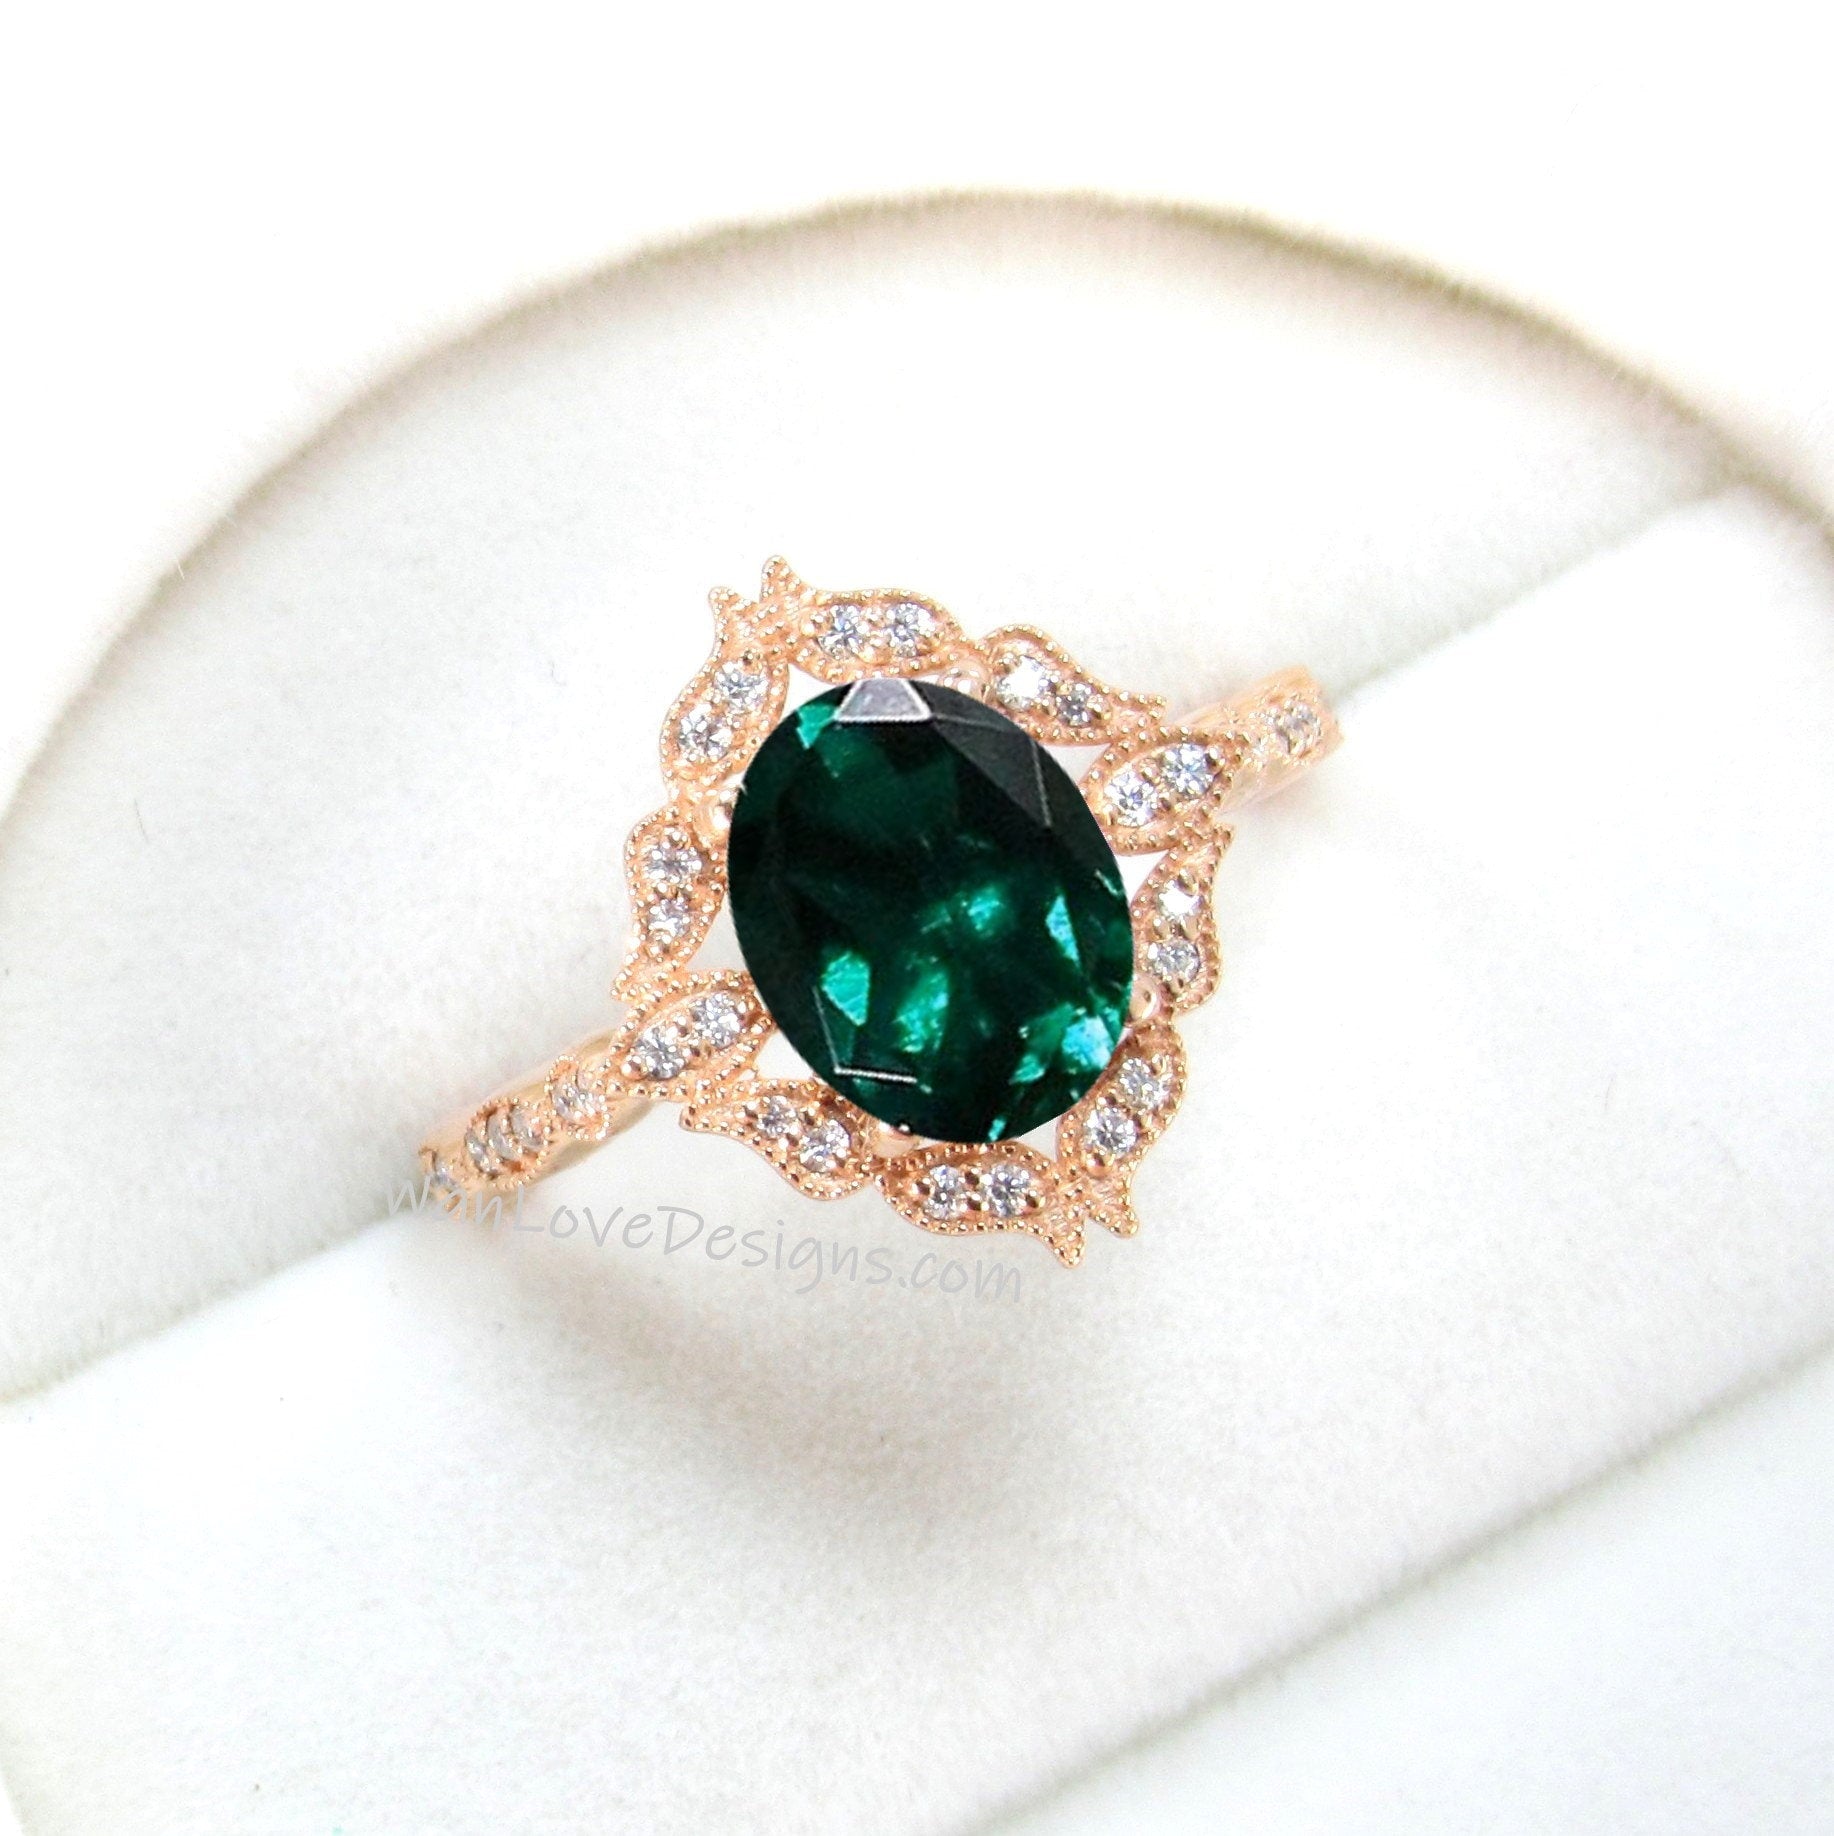 Emerald Oval & Diamond Ring, Floral Diamond Ring with Emerald, Emerald Milgrain Ring, Green Engagement Ring, Custom, WanLoveDesigns Wan Love Designs